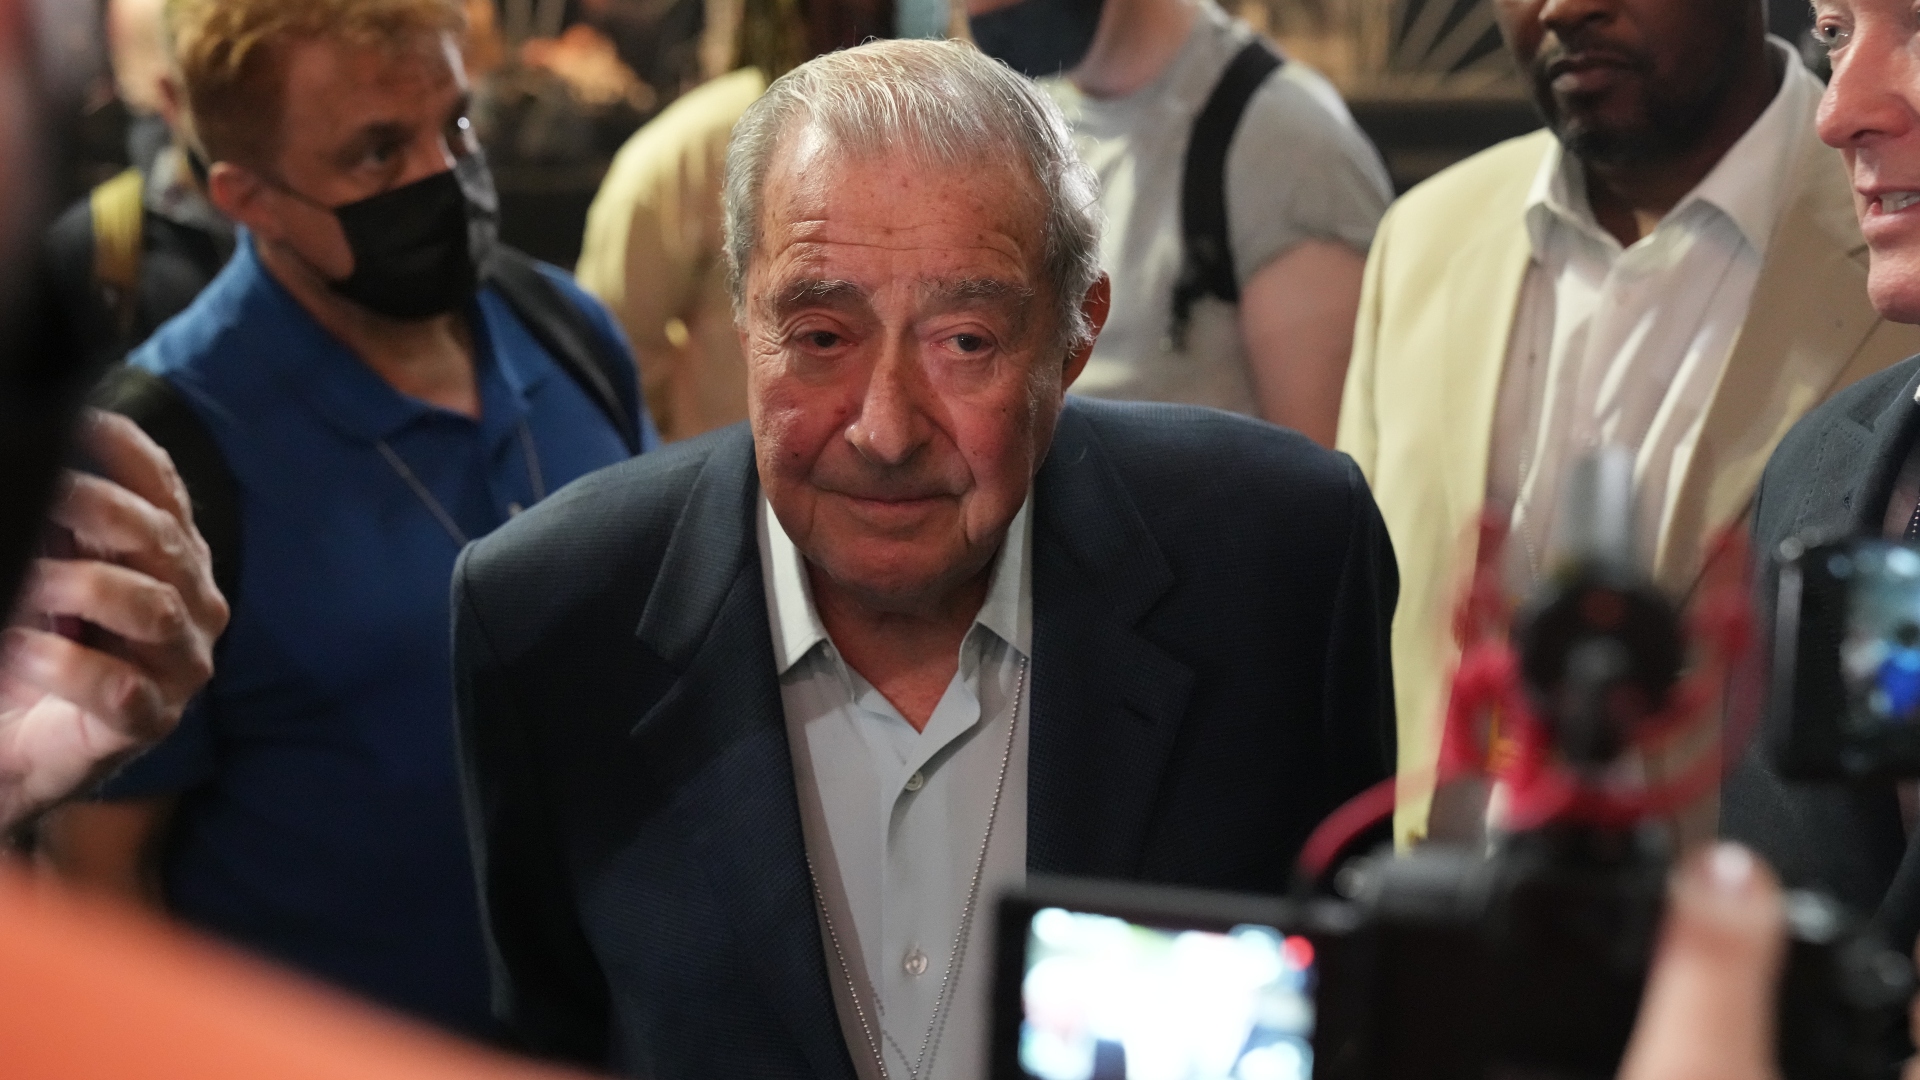 Bob Arum names the fight he wants to happen that will leave boxing fans 'in awe'